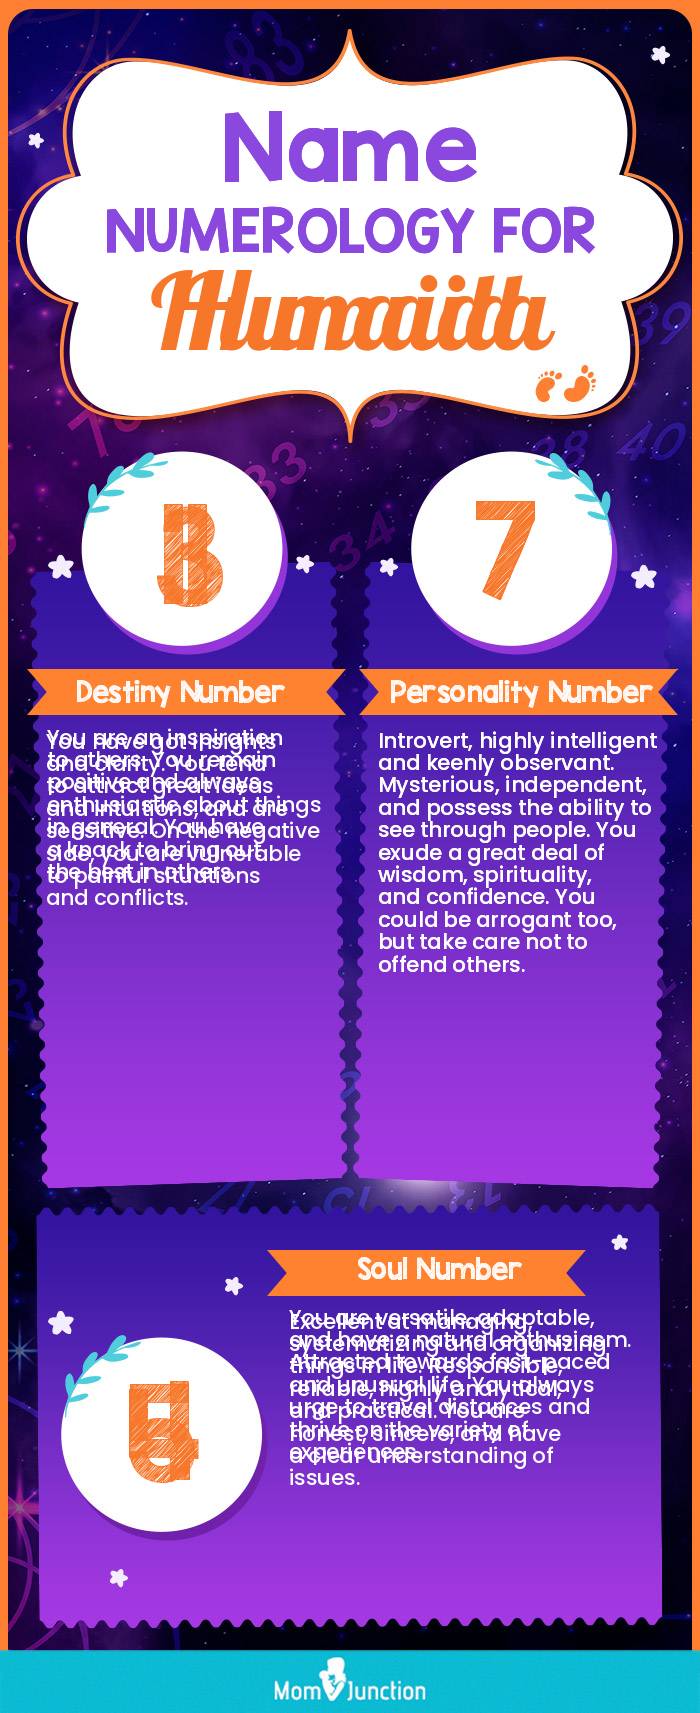 name-numerology-for-humaid-boy